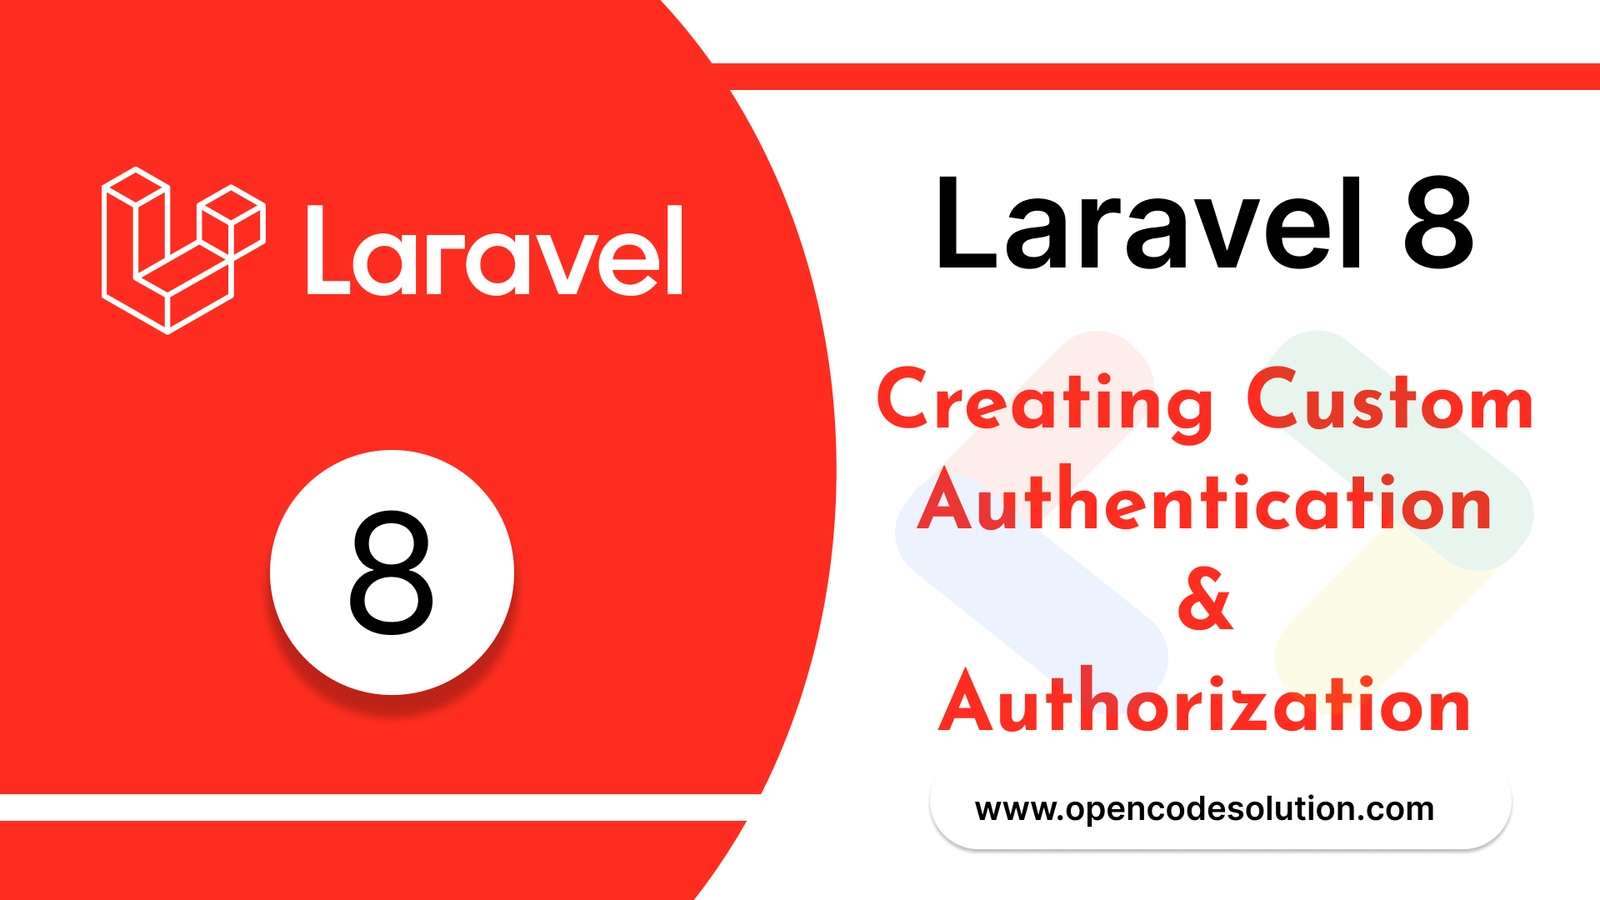 Creating Custom Authentication and Authorization in Laravel 8 - A Step-by-Step Guide